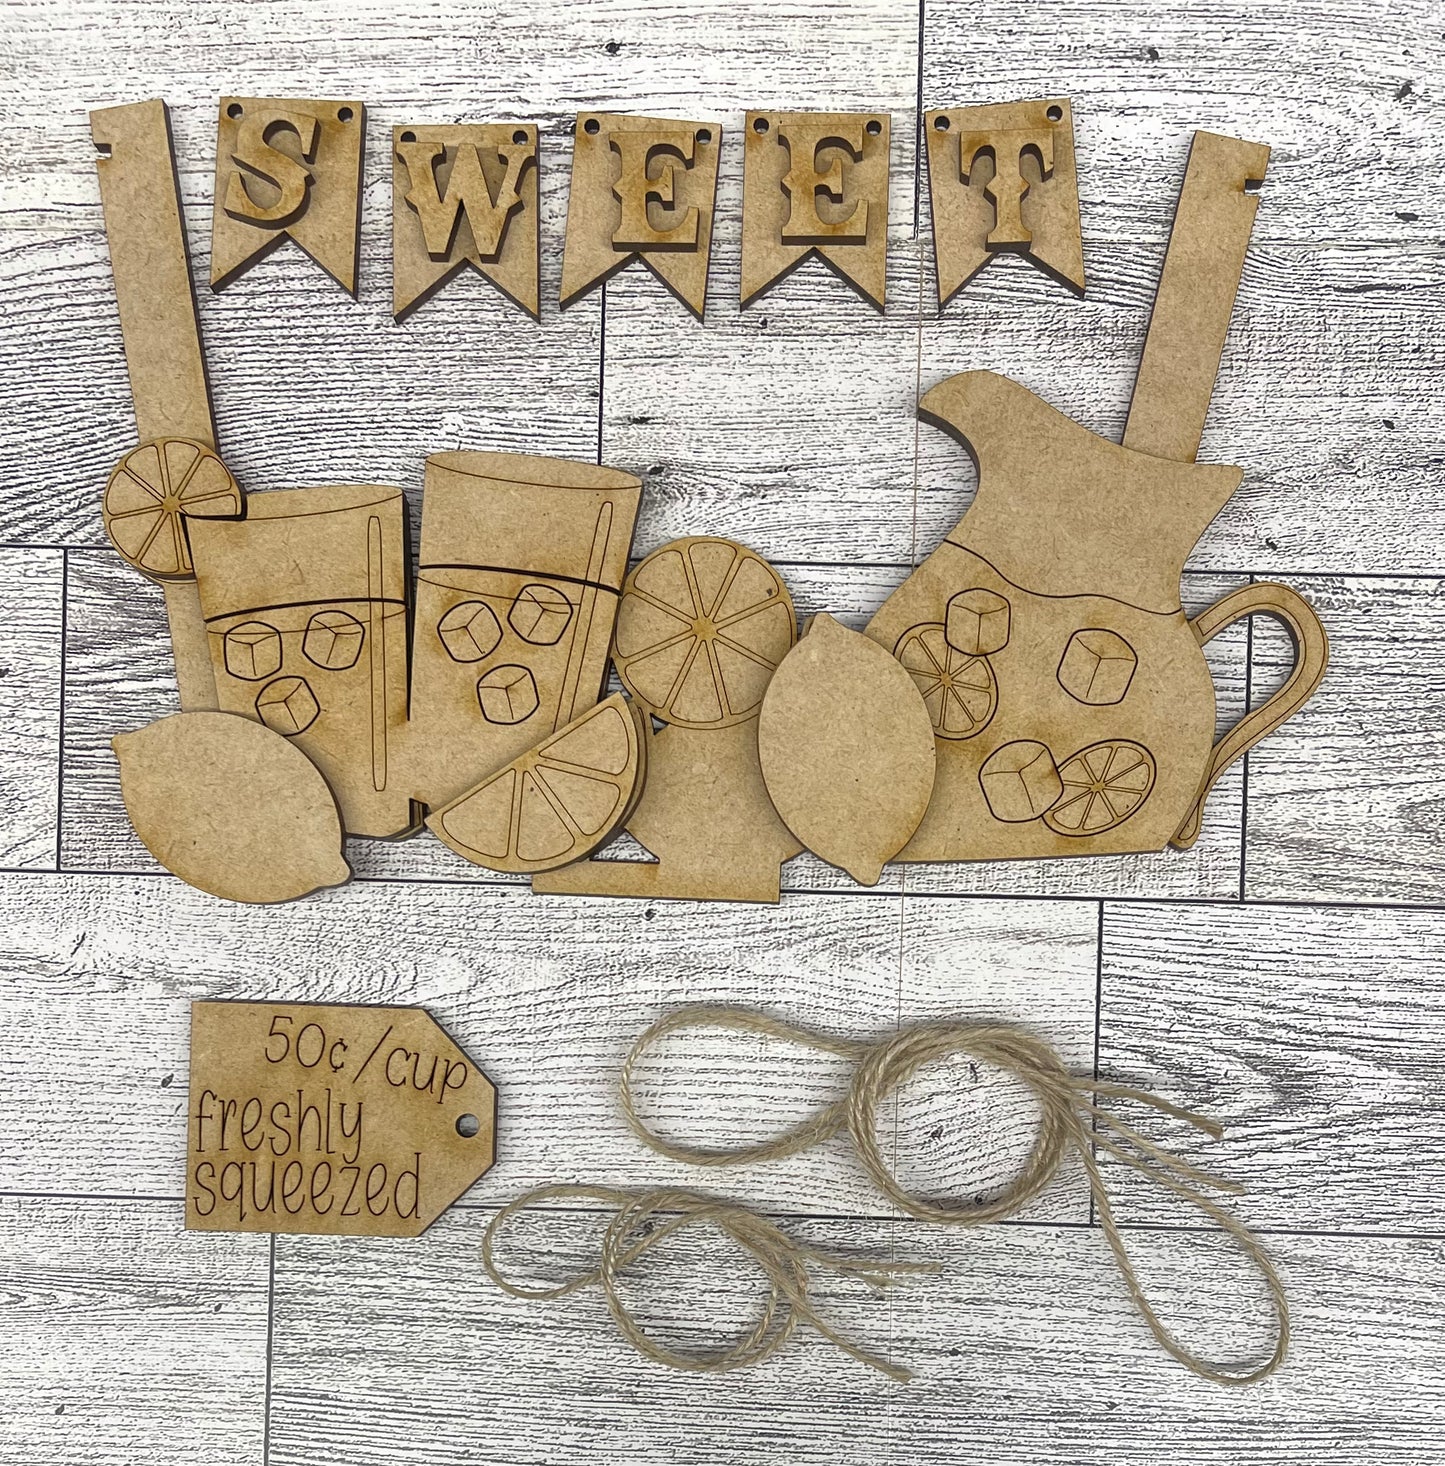 Lemonade Insert for basket - unpainted wooden cutouts, ready for you to paint